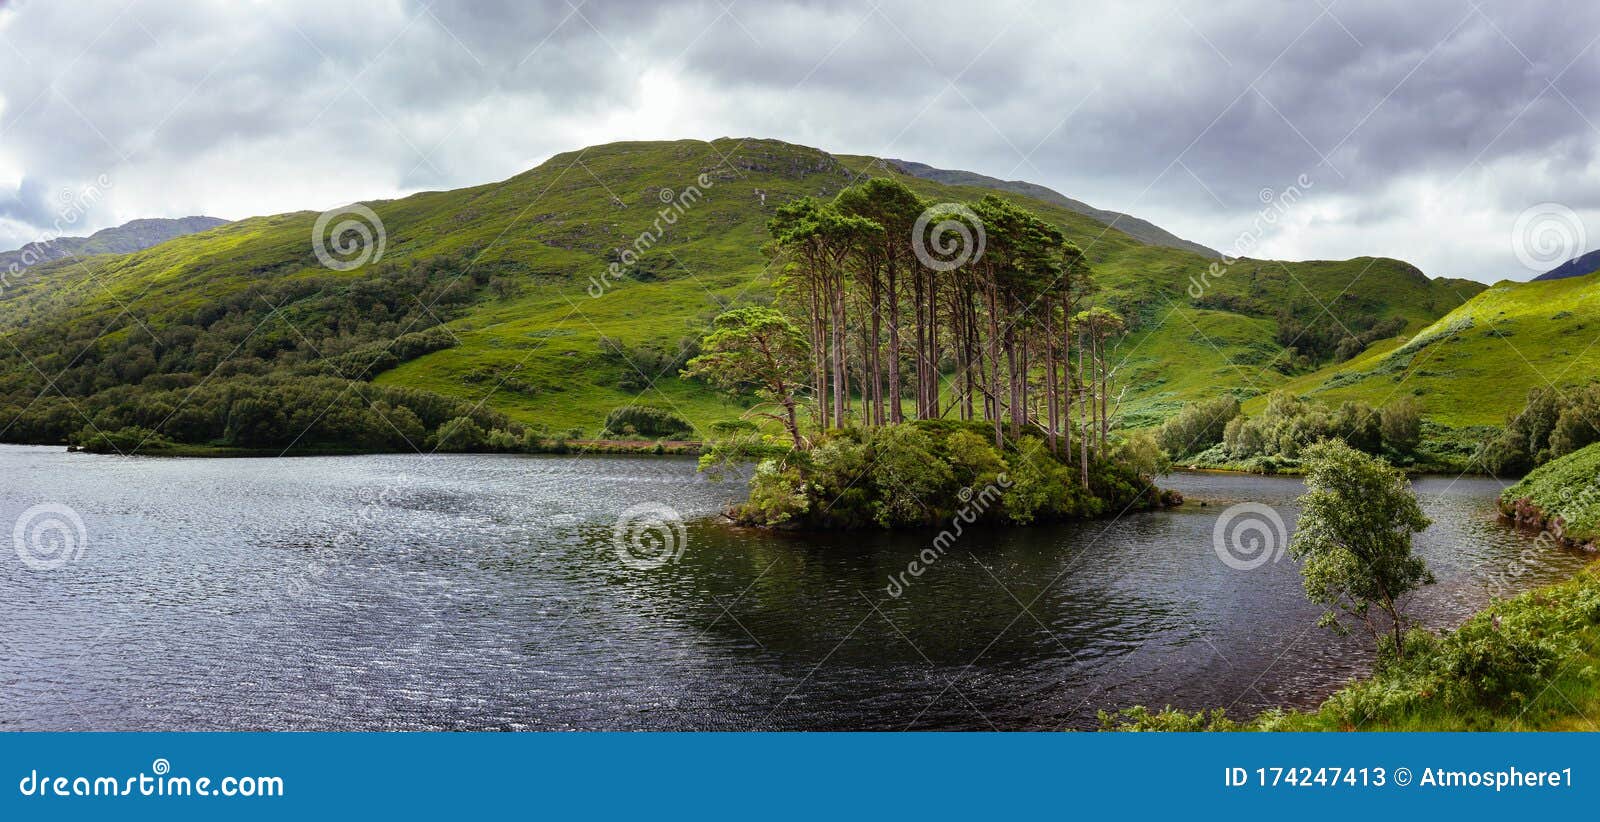 small island on loch eilt - place where was dumbledore`s grave in the harry potter movie, located near glenfinnan viaduct